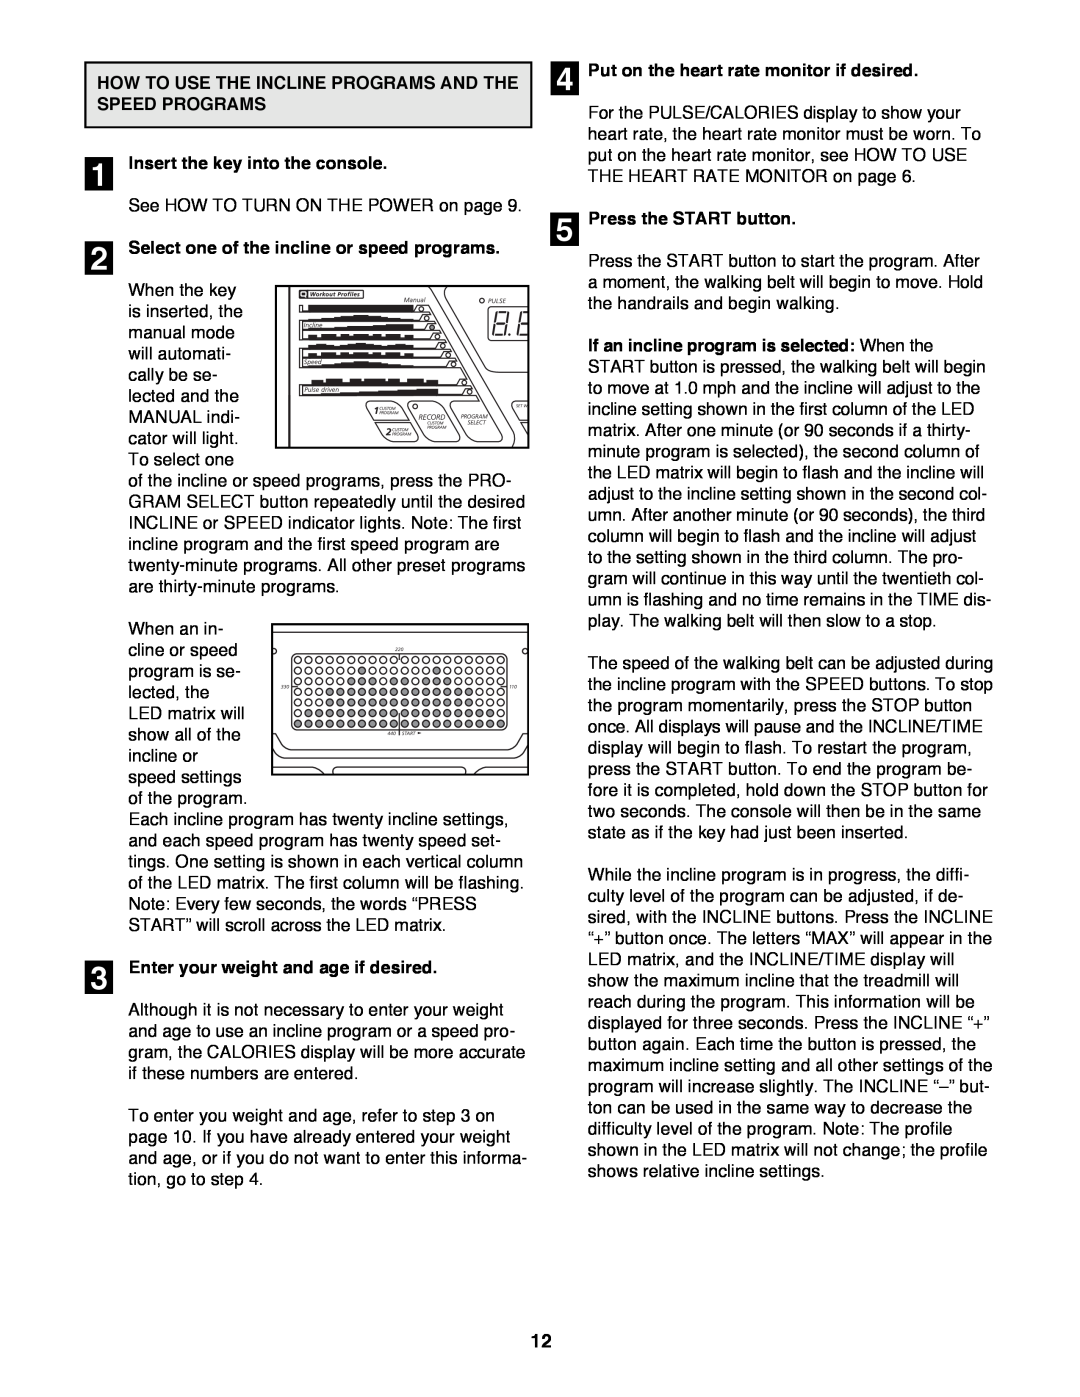 Image 831.297572 user manual How To Use The Incline Programs And The Speed Programs, Insert the key into the console 